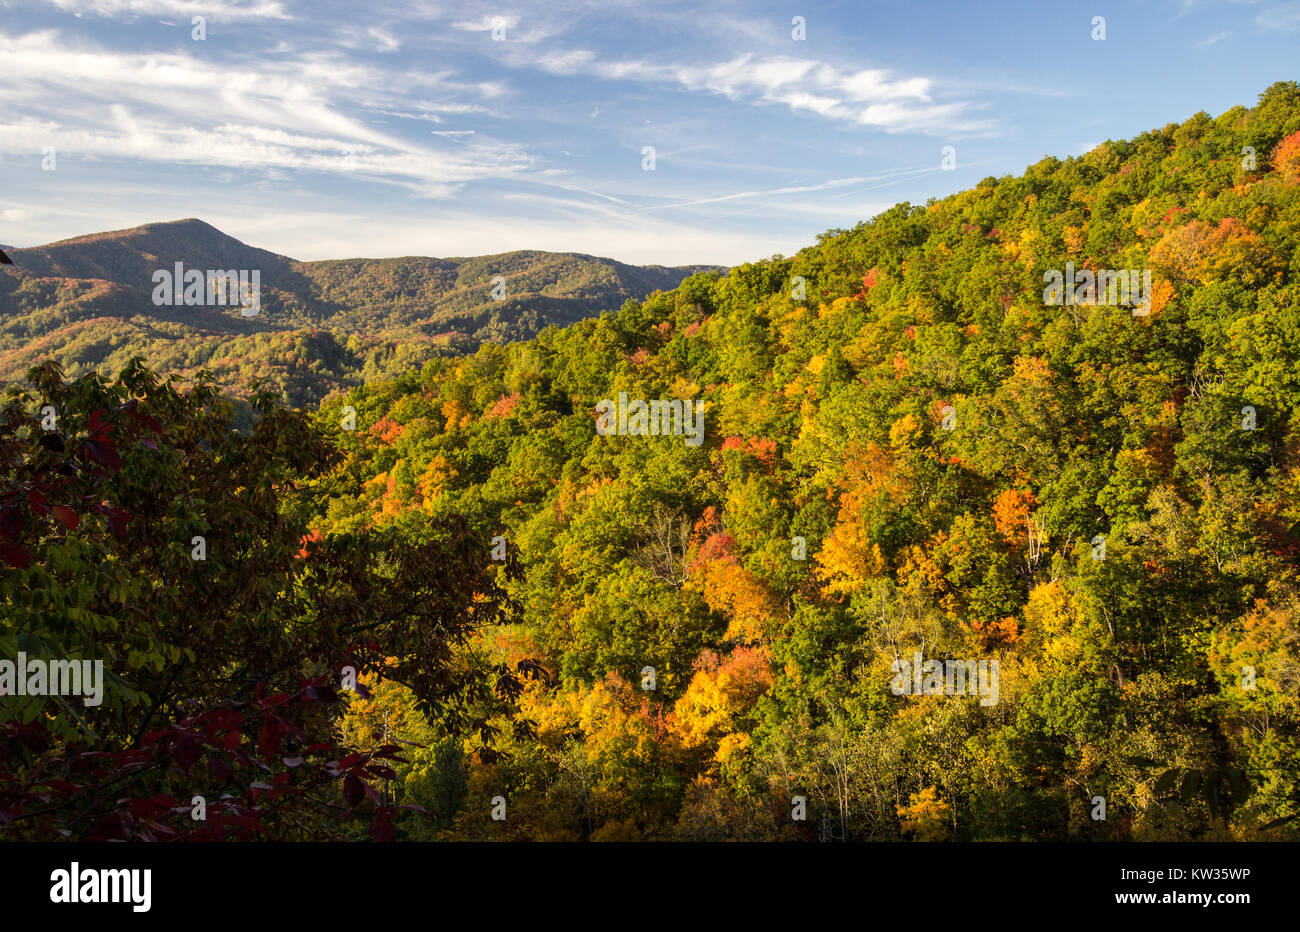 Smoky Mountains Autumn Landscapes. Autumn colors from an overlook in the Great Smoky Mountains National Park. Stock Photo